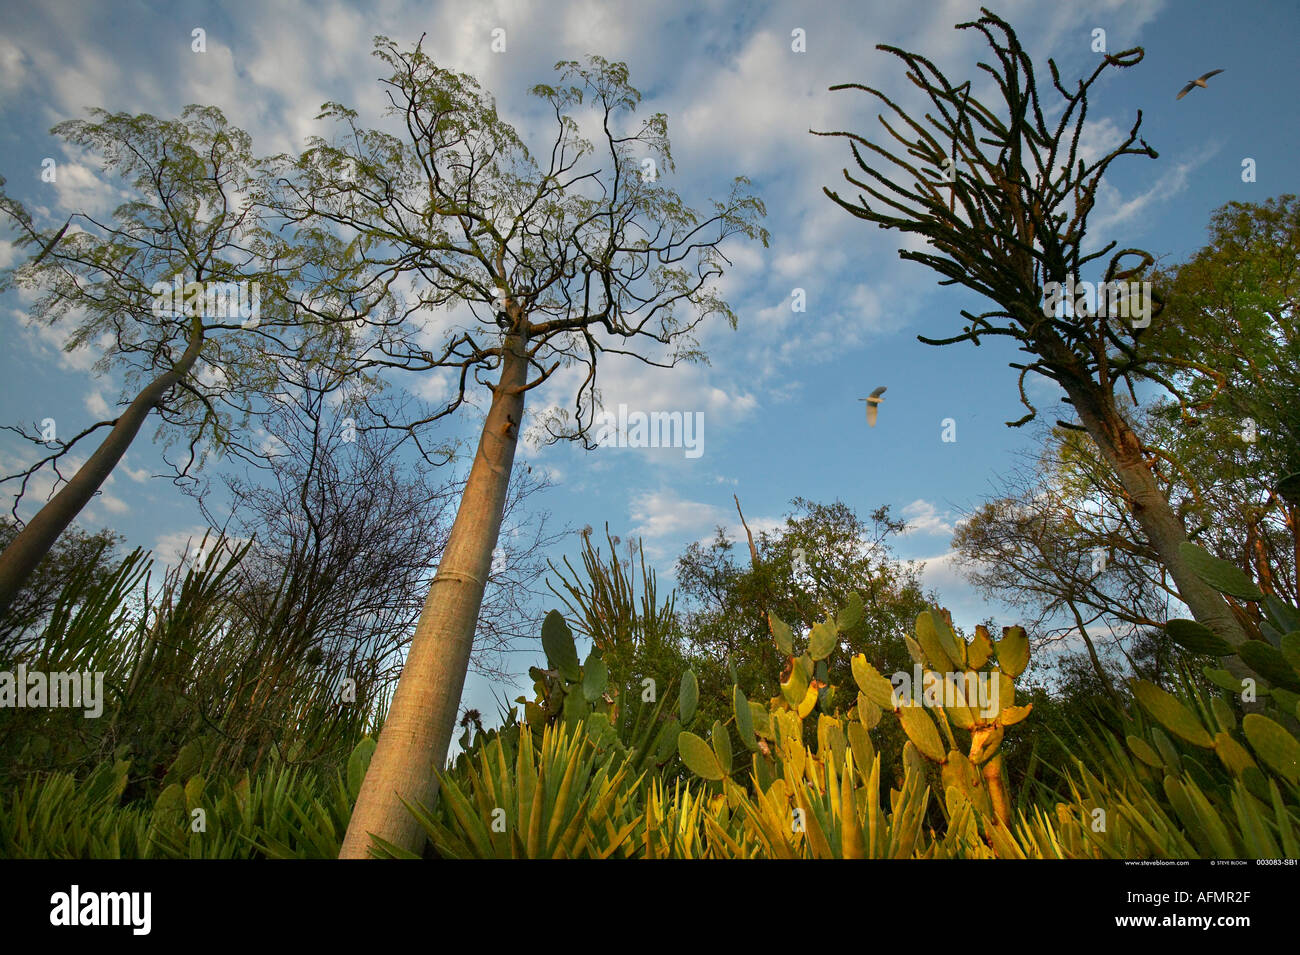 The spiny forest of Berenty Madagascar Stock Photo